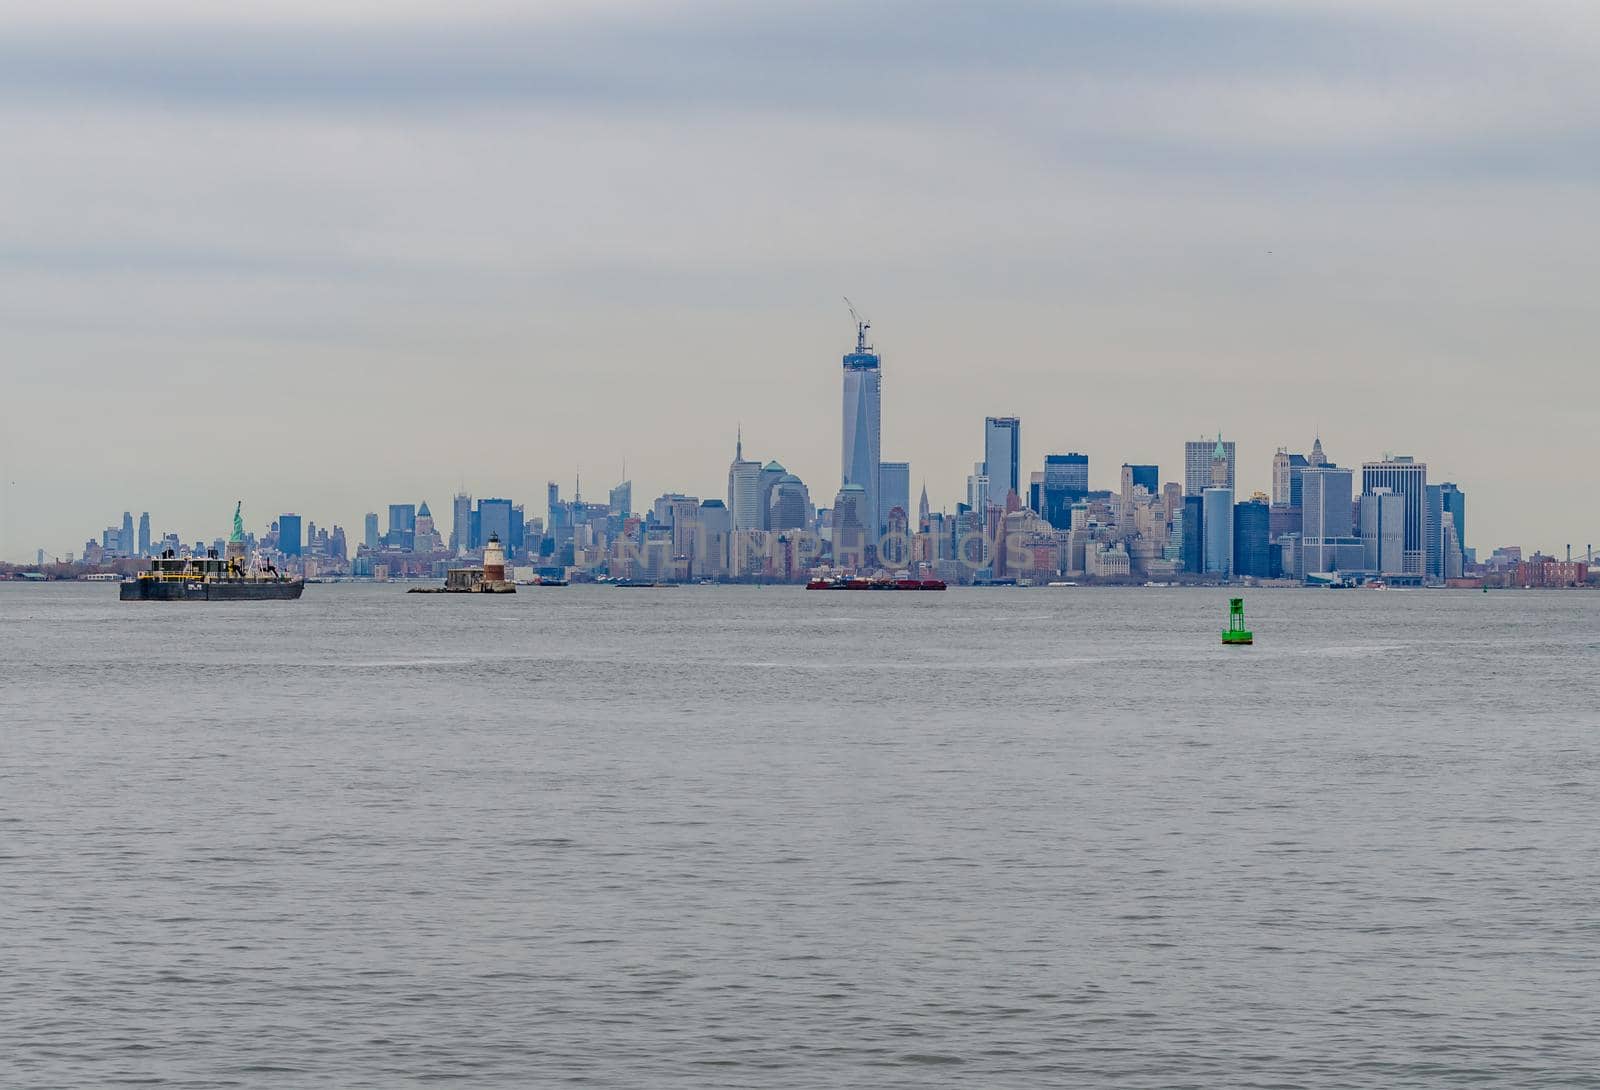 Skyline of Manhattan, New York City with Hudson river in forefront during winter day with overcast, wide angle shot from the distance, view from Staten island, during winter day with overcast, ships and lighthouse in the forefront, horizontal